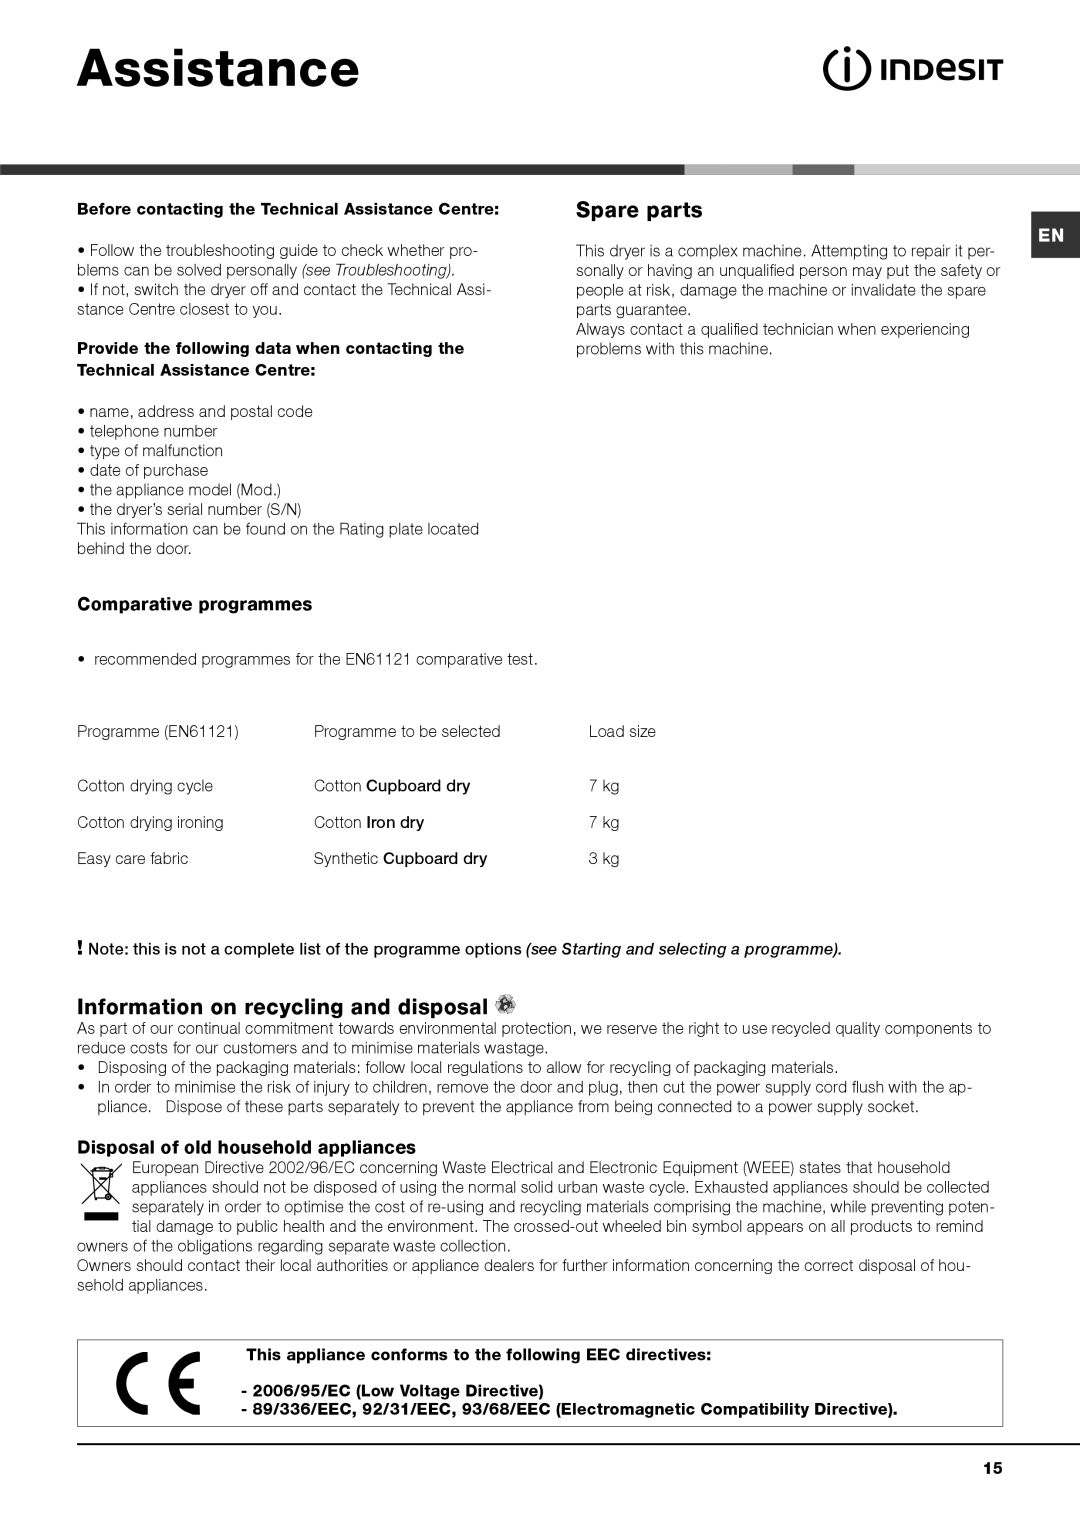 Indesit IDVA 735 S instruction manual Assistance, Spare parts, Information on recycling and disposal 